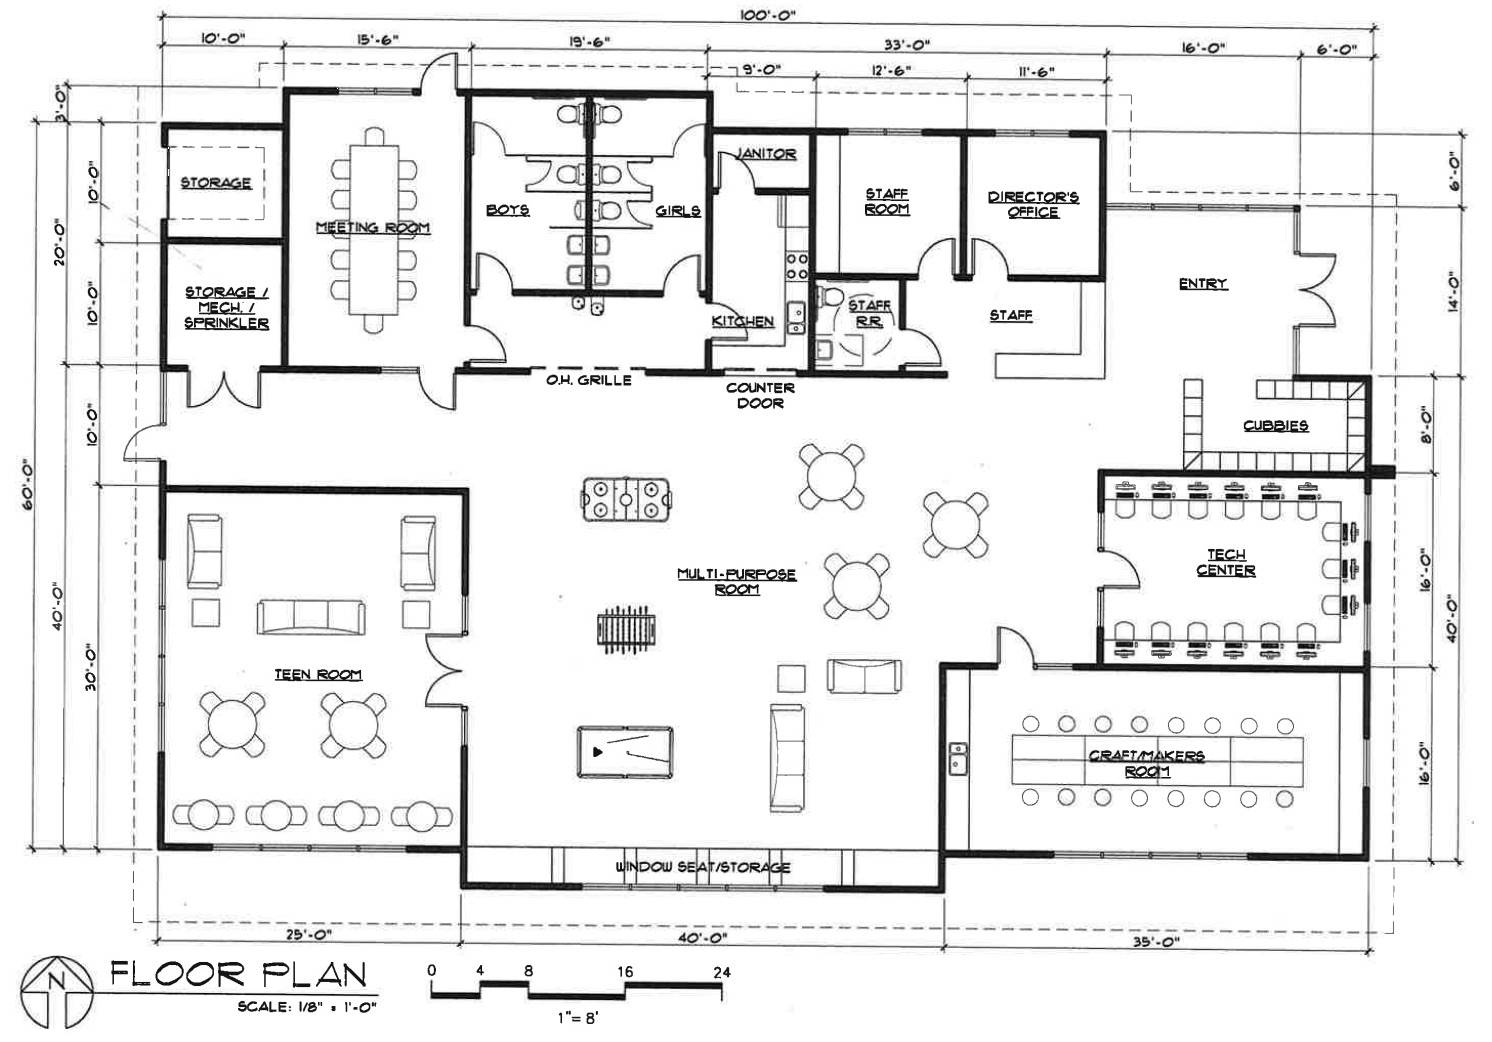 The floor plan shows the new club building will be much better suited to the club’s various functions and members’ needs. (Photo courtesy of the Boys and Girls Club)